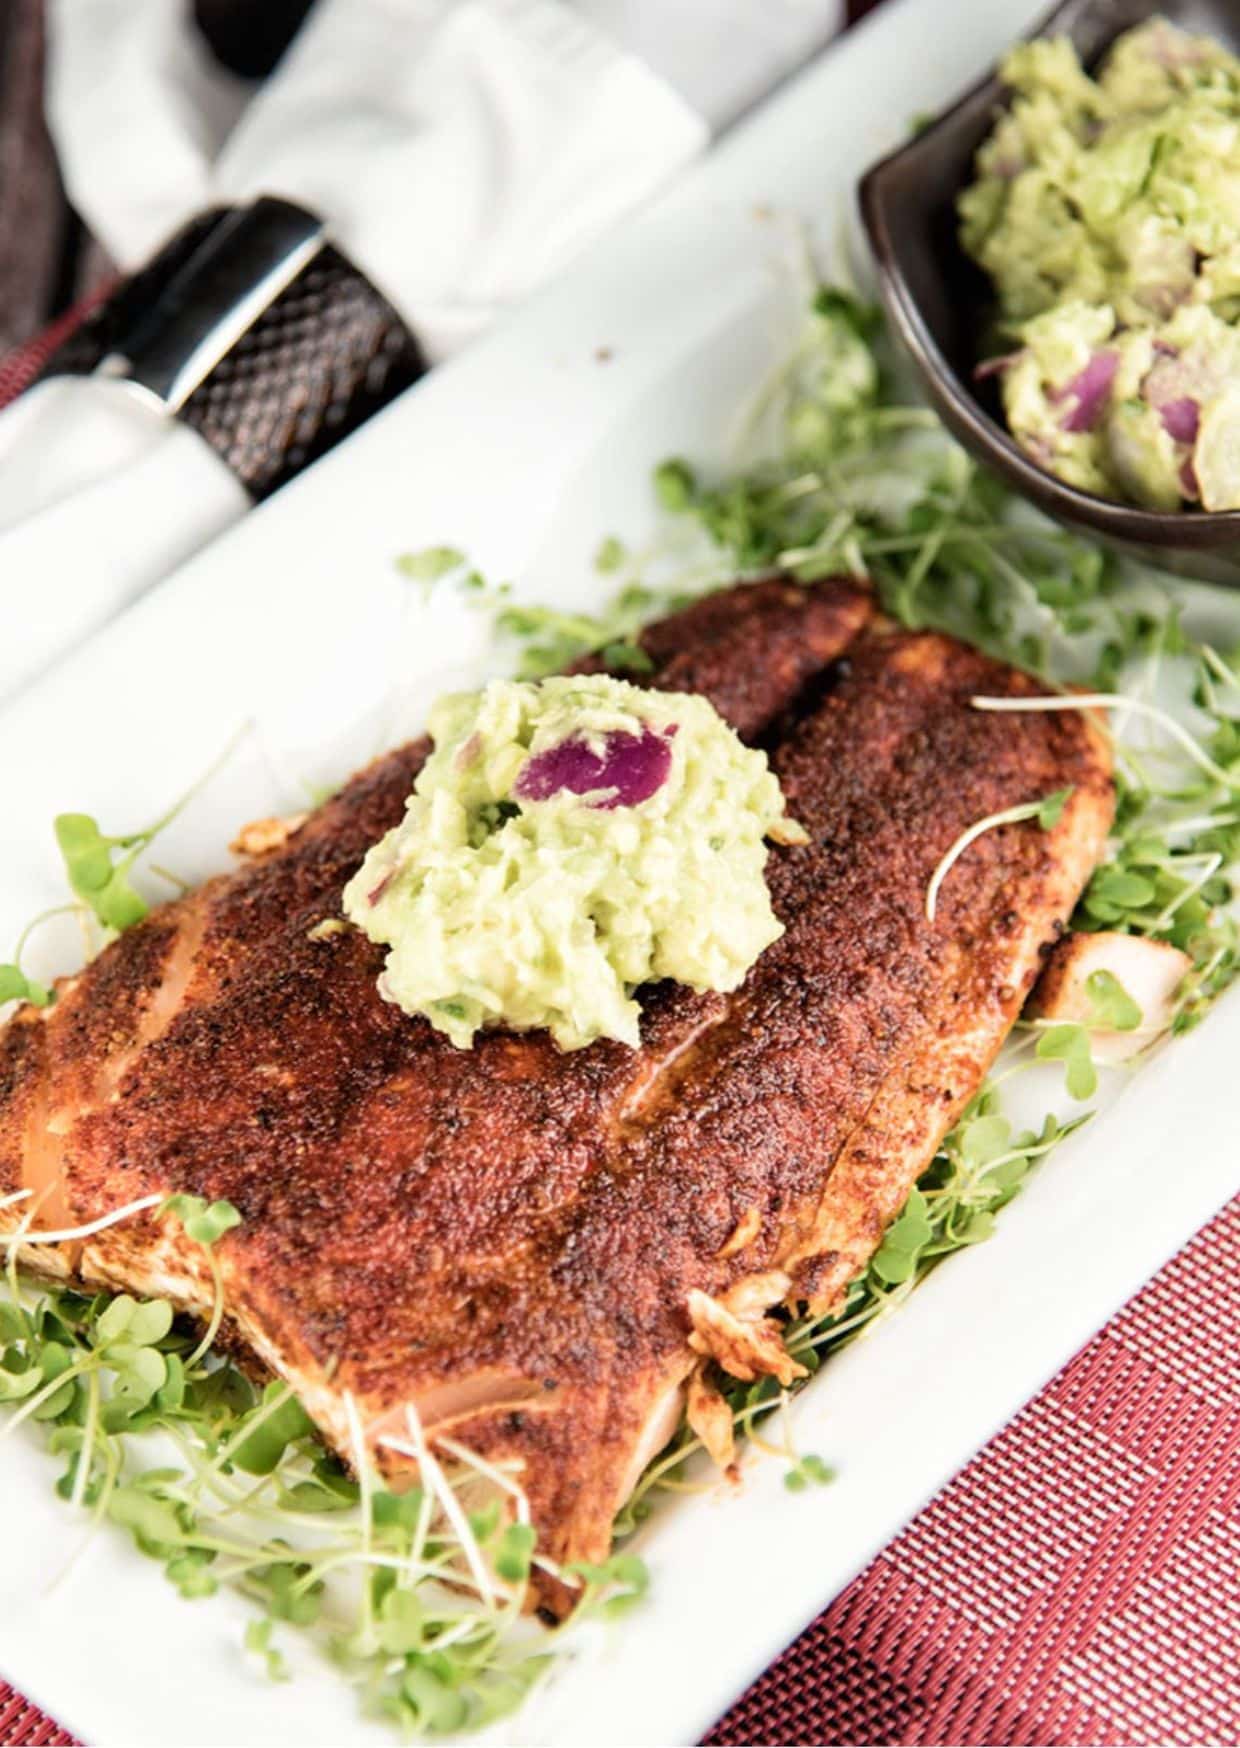 https://paleoleap.com/wp-content/uploads/2015/08/grilled-salmon-with-avocado-sauce-recipe.jpg